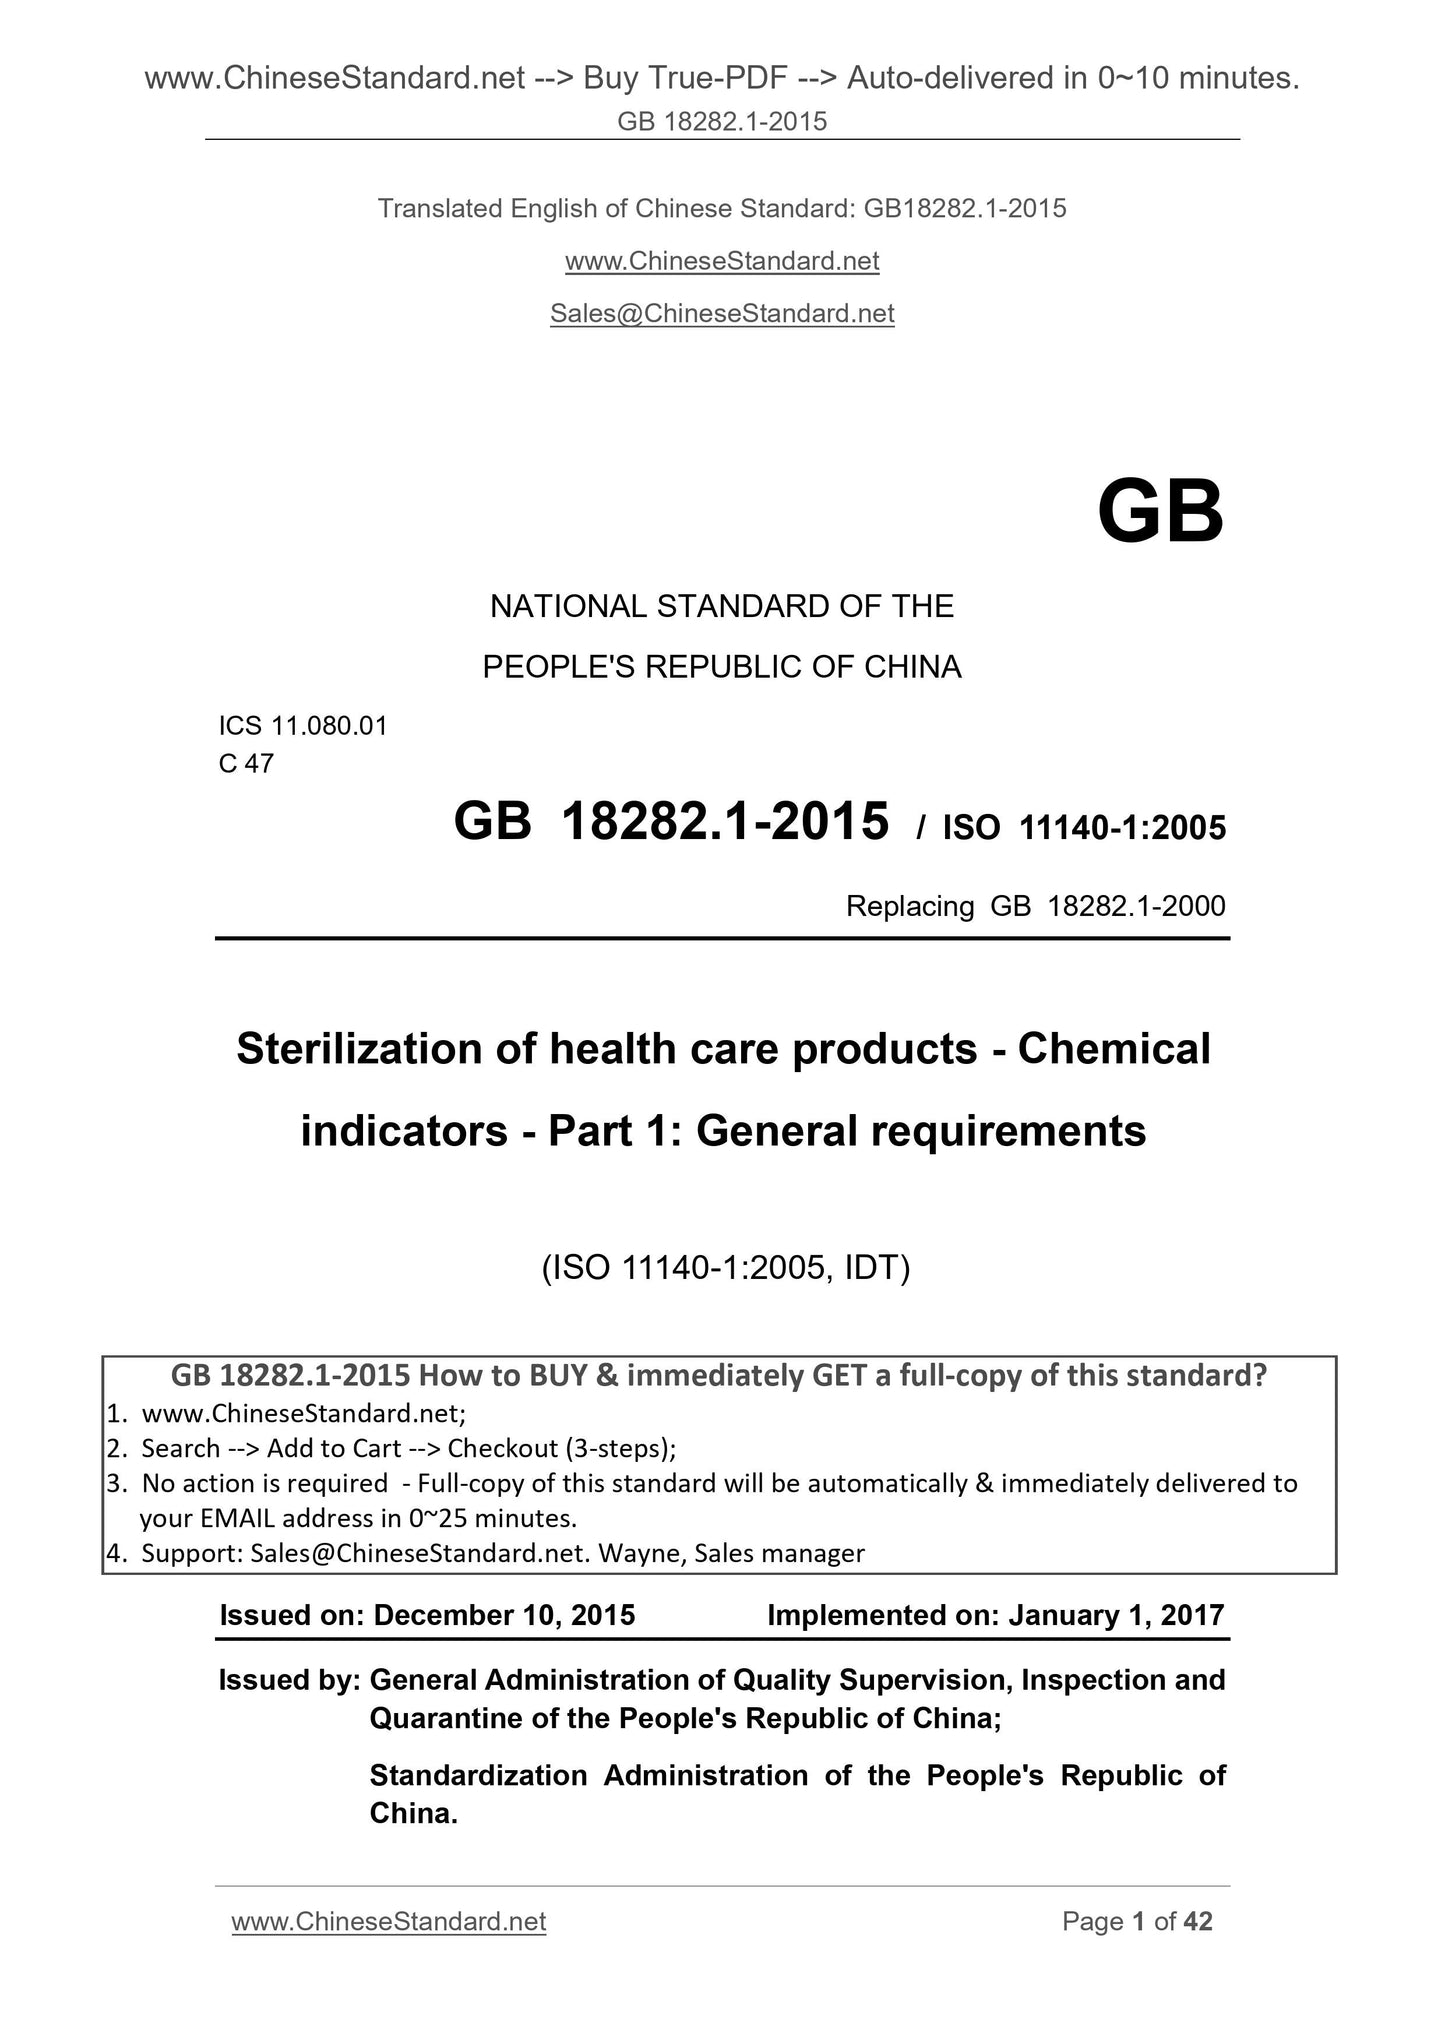 GB 18282.1-2015 Page 1